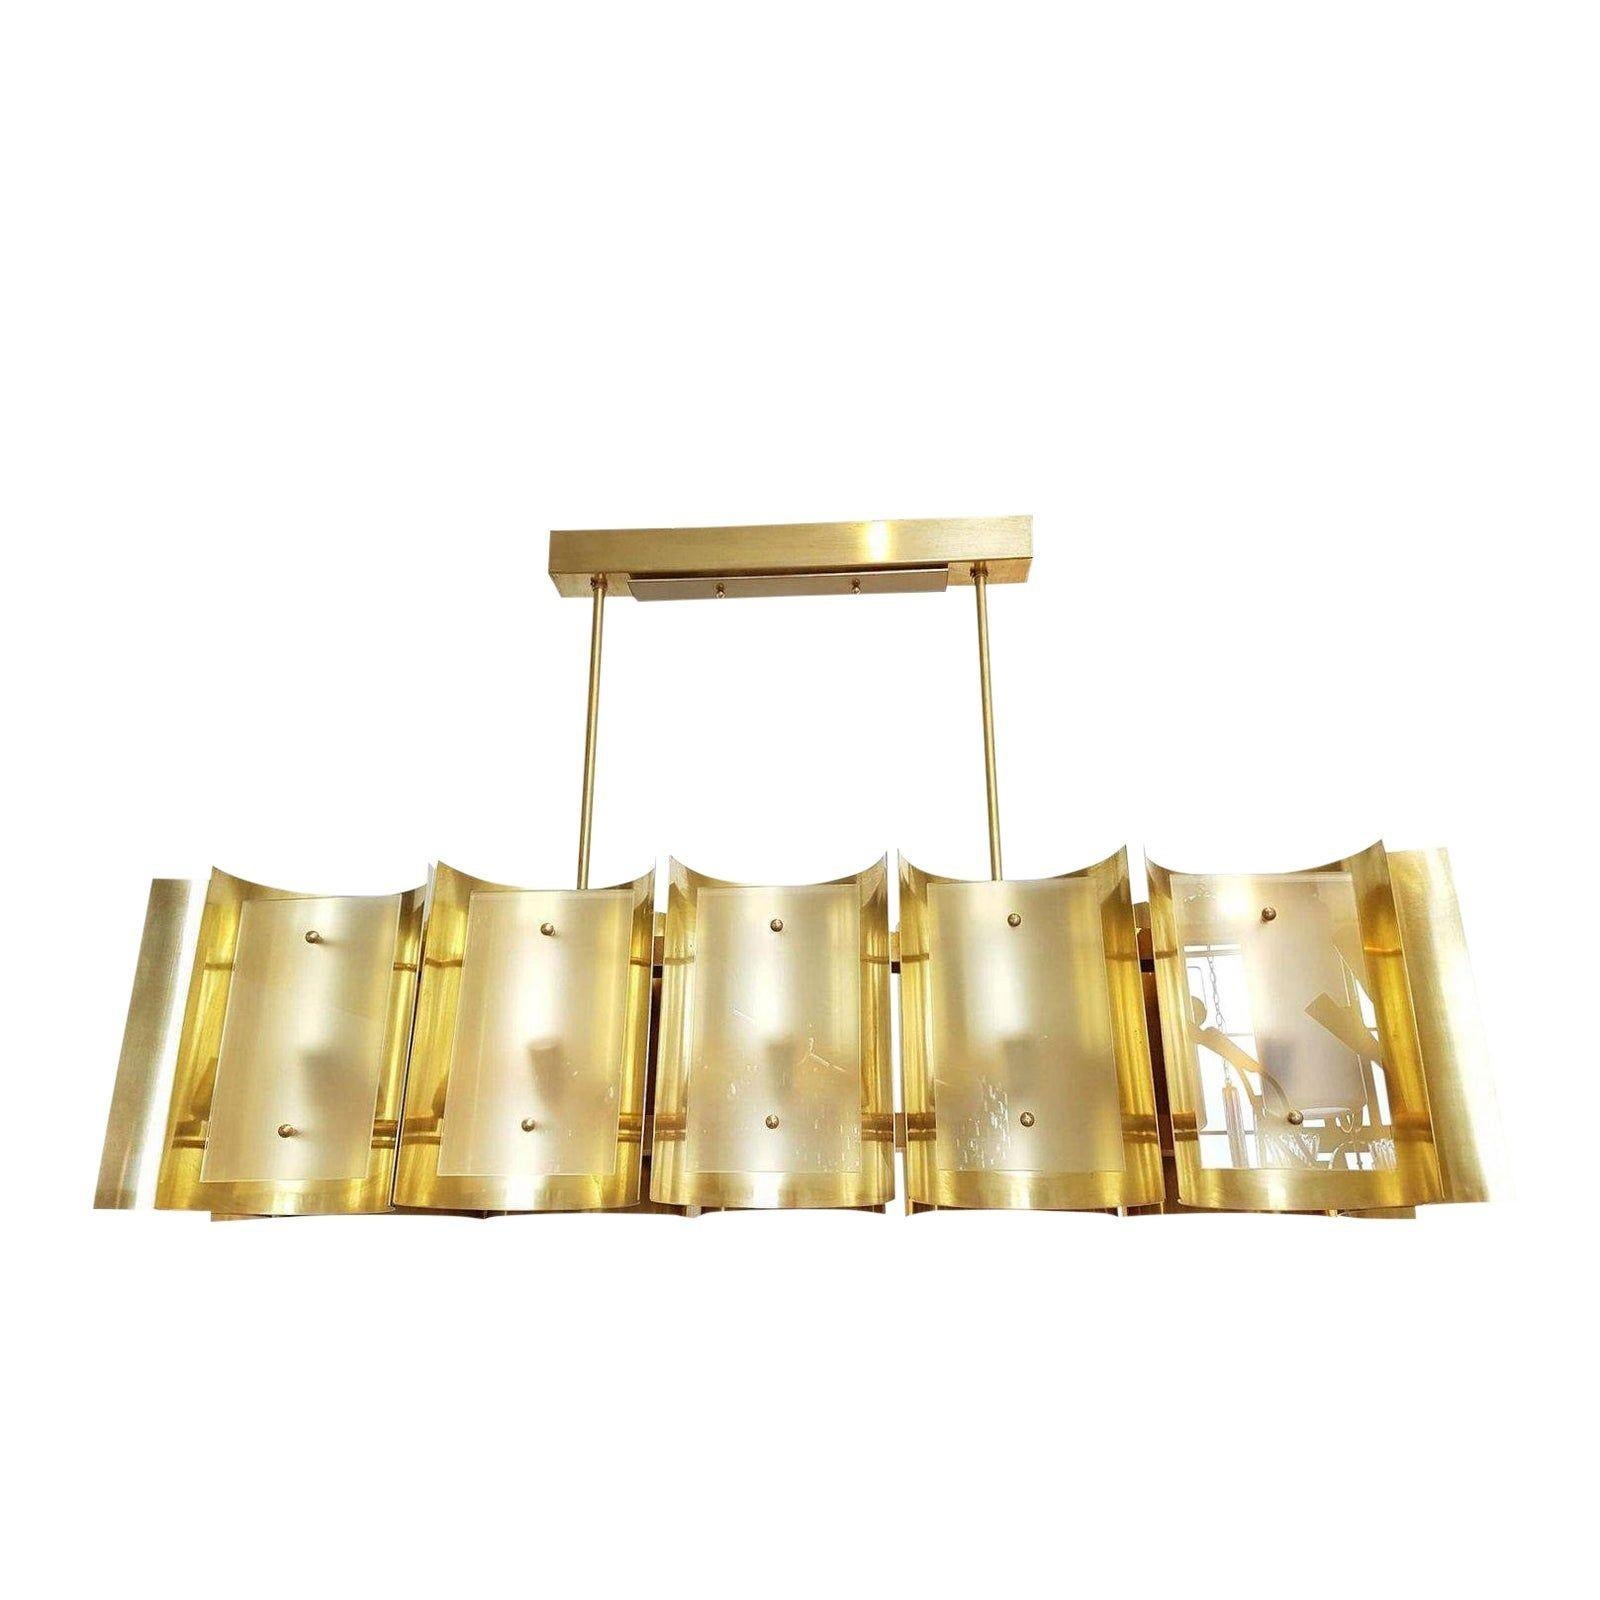 Elongated Mid Century Modern Brass chandelier, attributed to Sciolari, Italy 1970s.
Mid Century chandelier or flush mount, made of 12 polished brass sheets, curved, nesting the light and covered up by a frosted glass.
The large chandelier has a